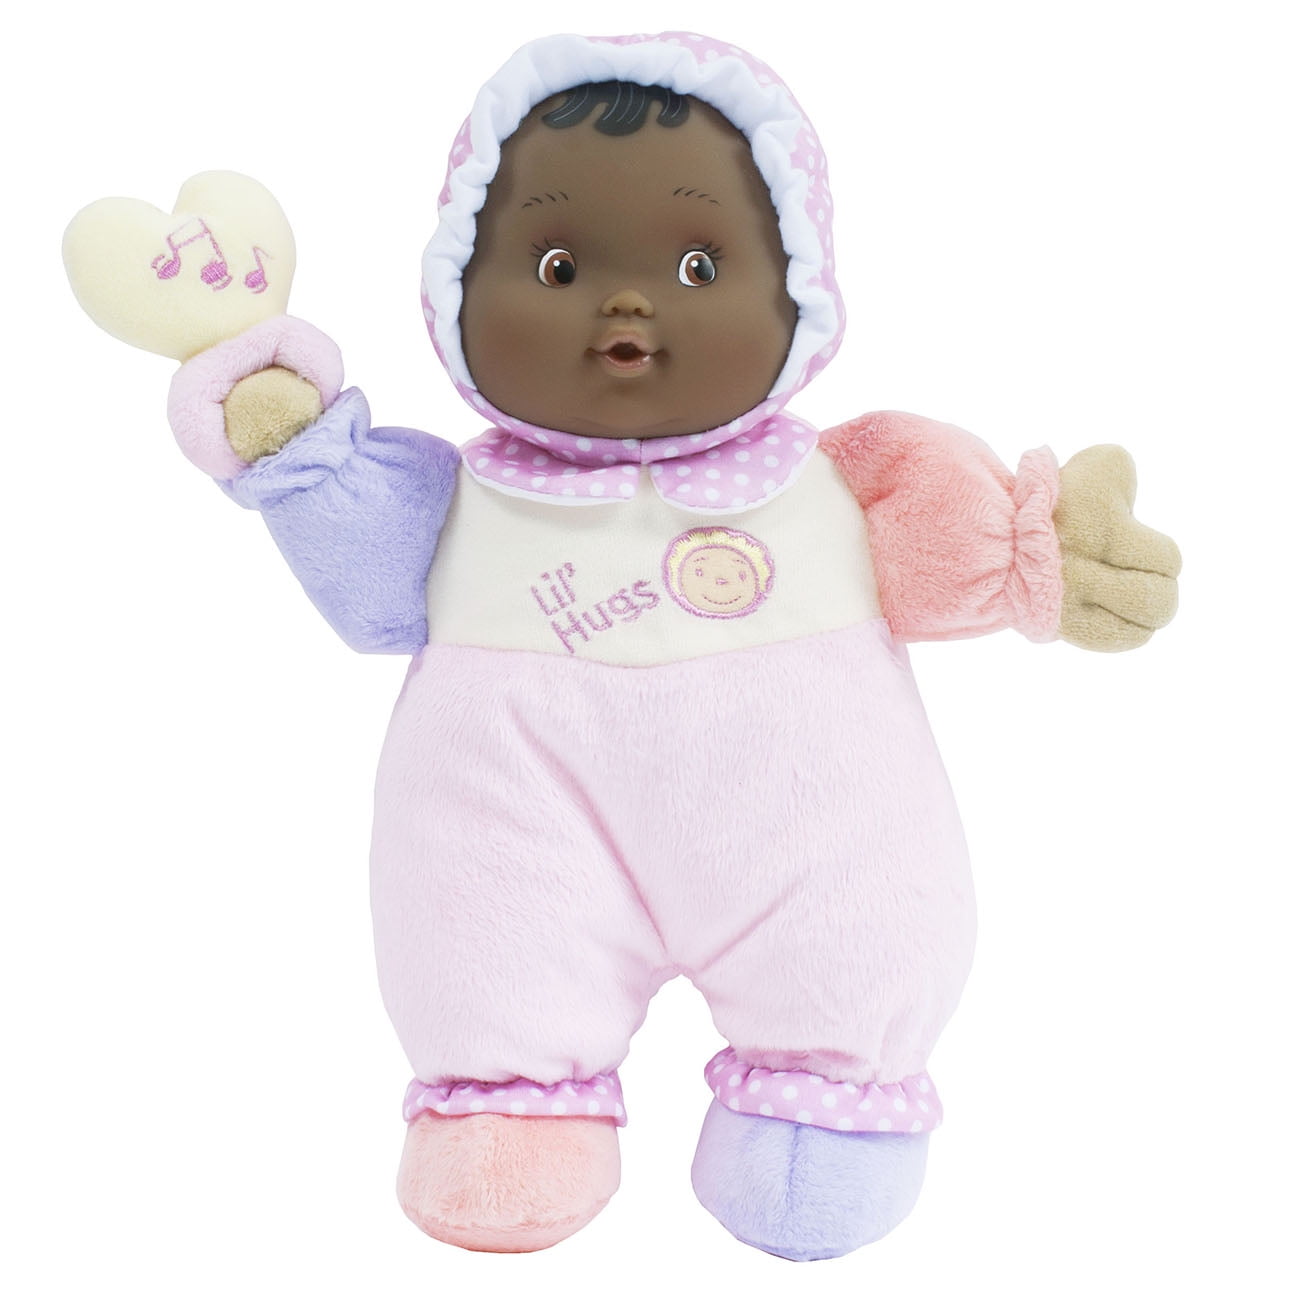 JC Toys Lil’ Hugs Pink Soft Body Your First Baby Doll Designed by 